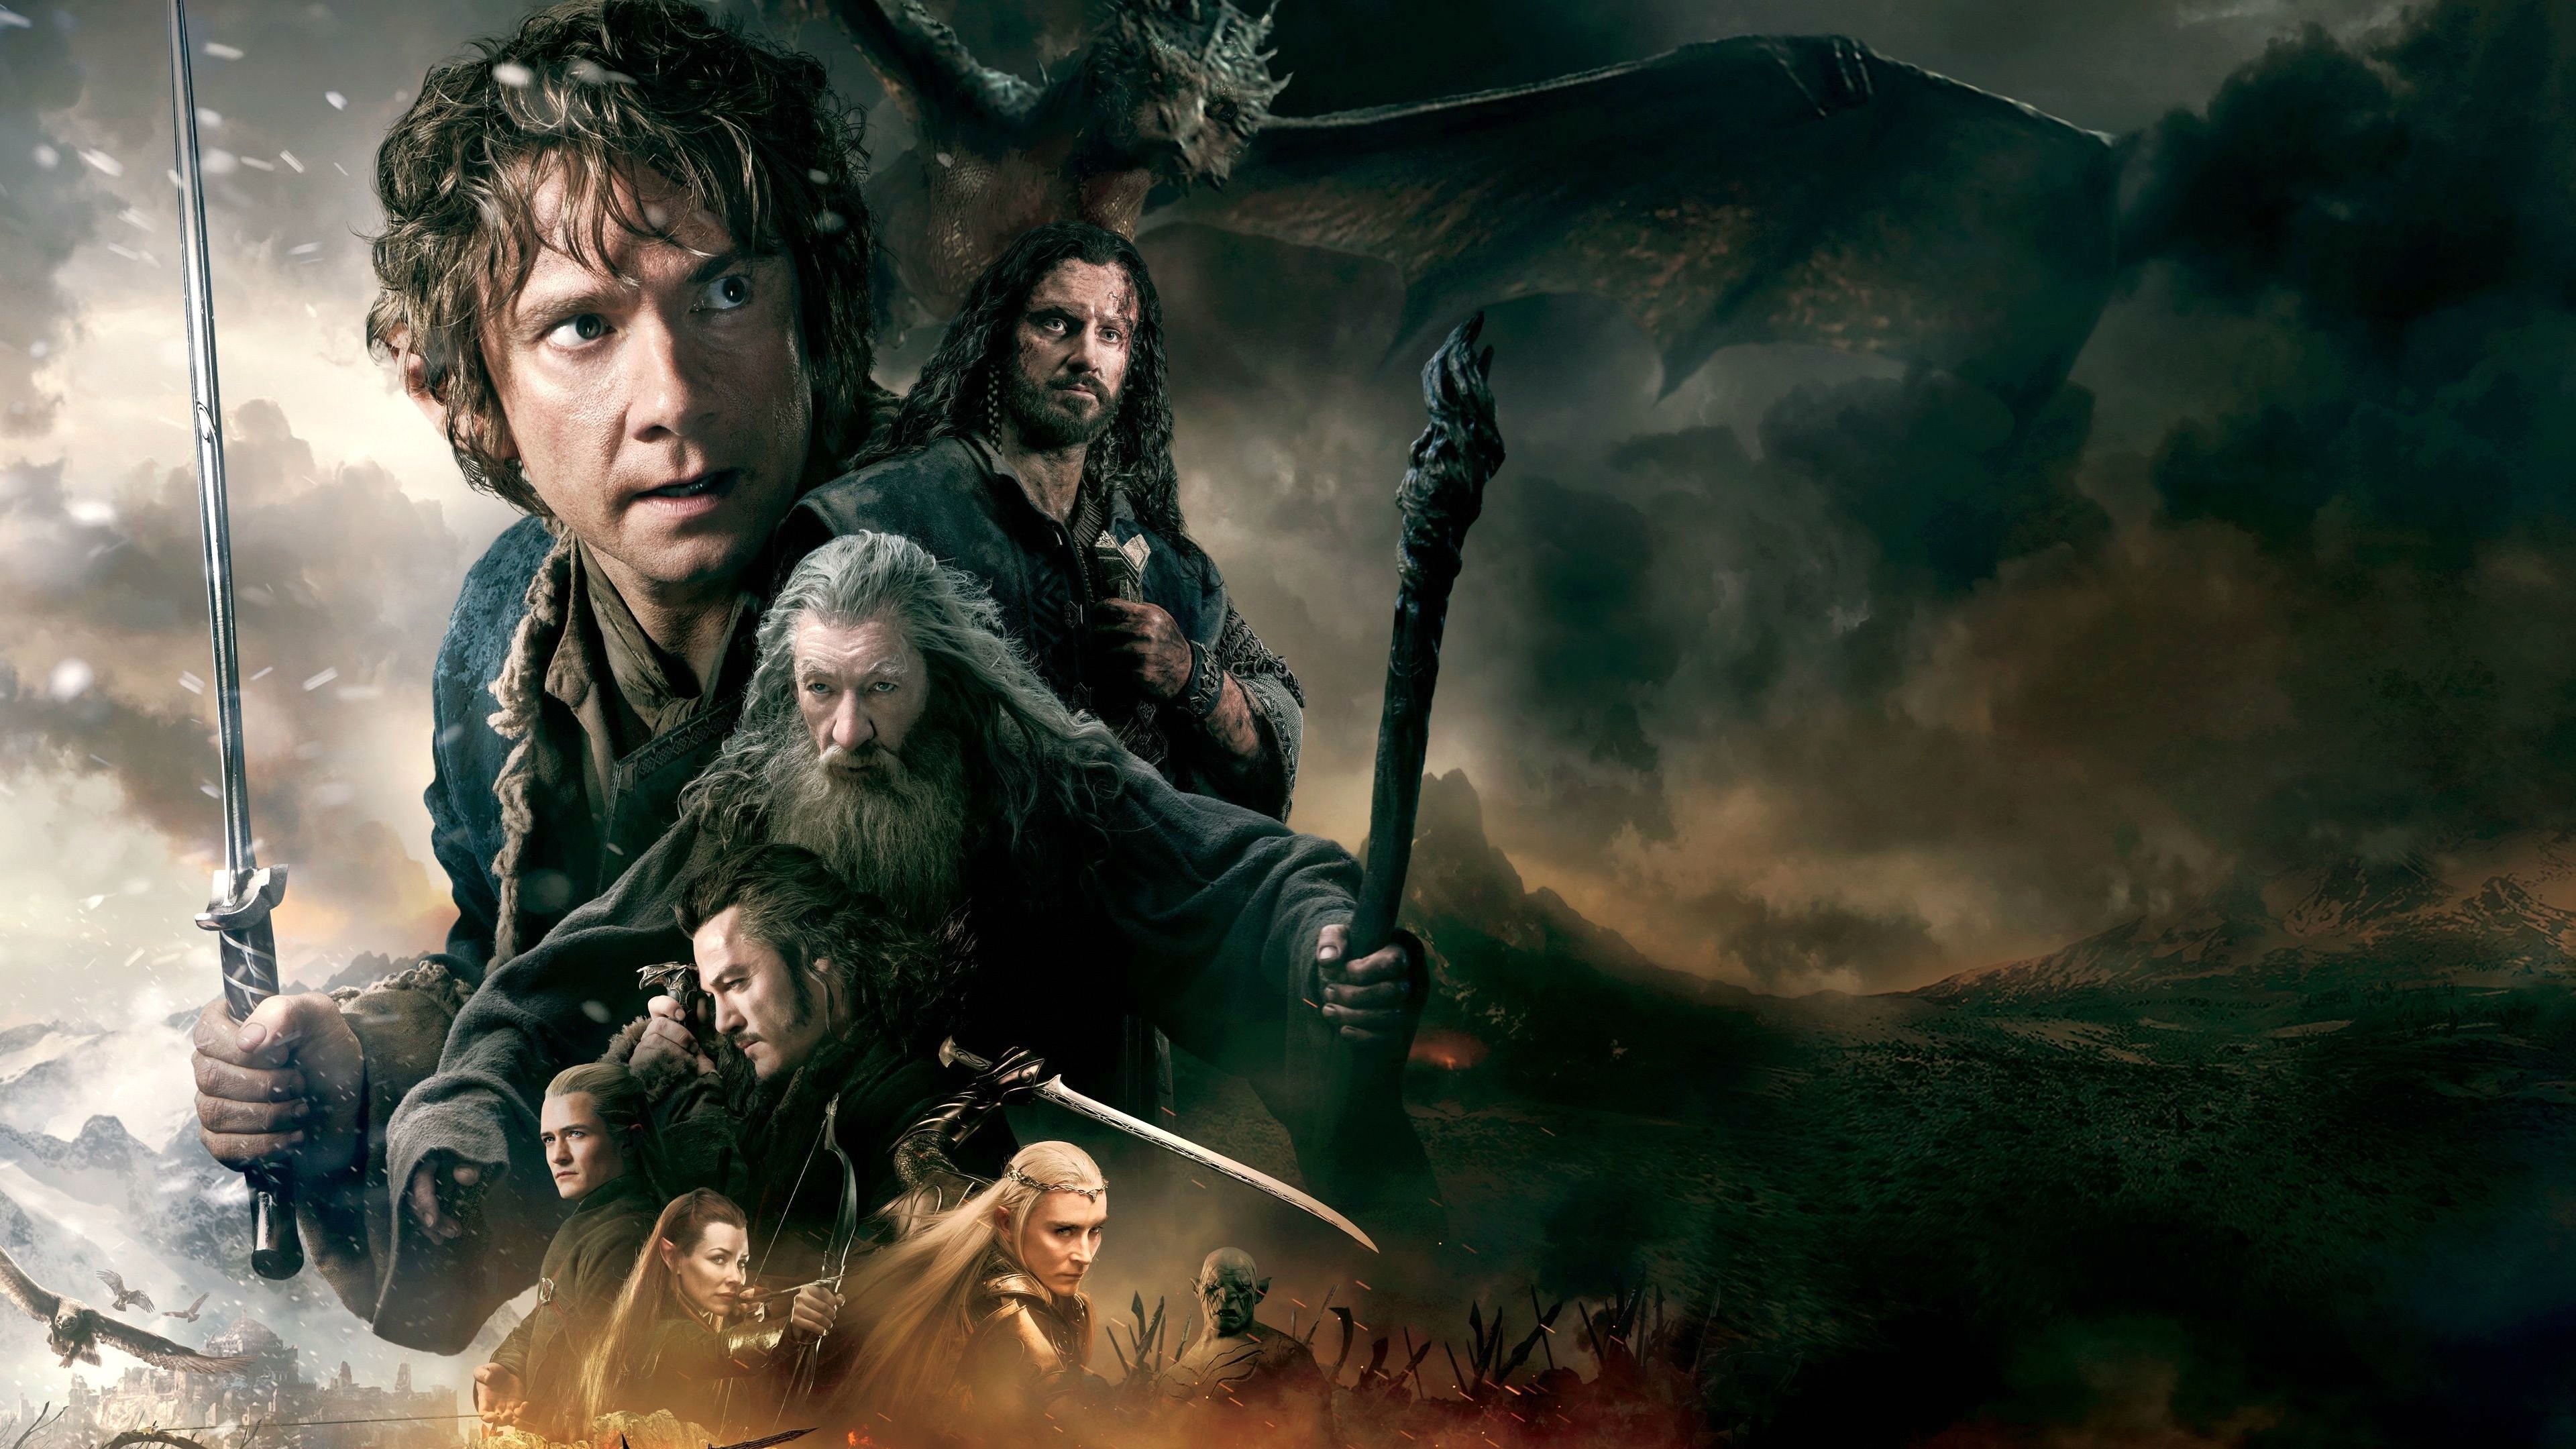 The Hobbit (Movie): The Battle of the Five Armies, J. R. R. Tolkien, LOTR. 3840x2160 4K Background.